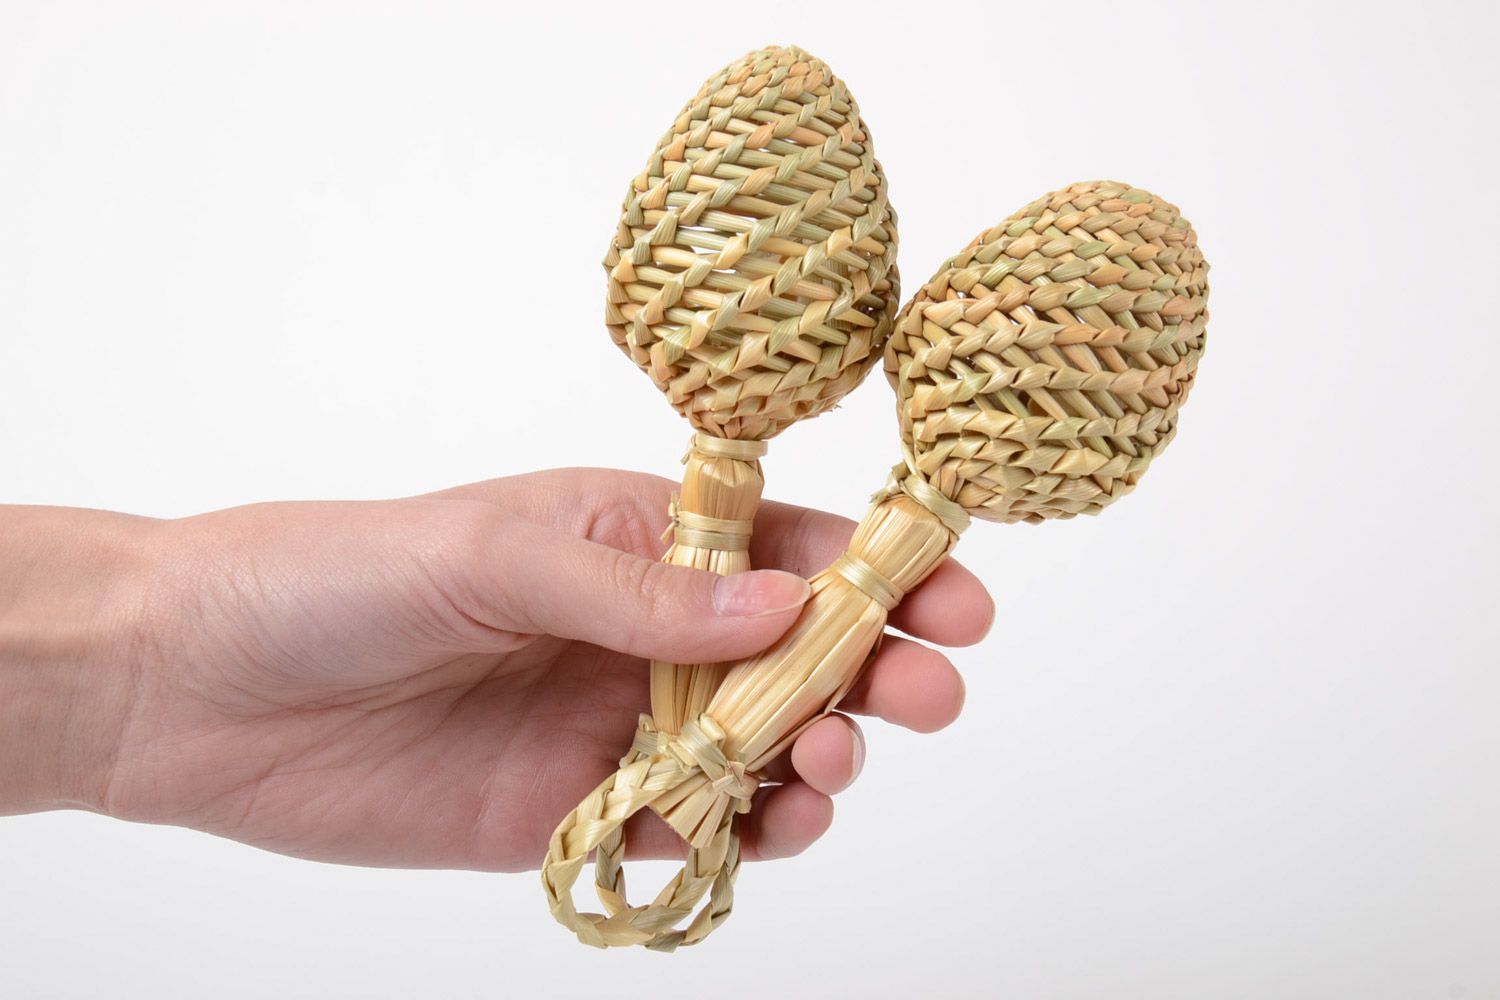 Set of 3 handmade eco friendly rattle toys woven of natural straw for babies photo 5